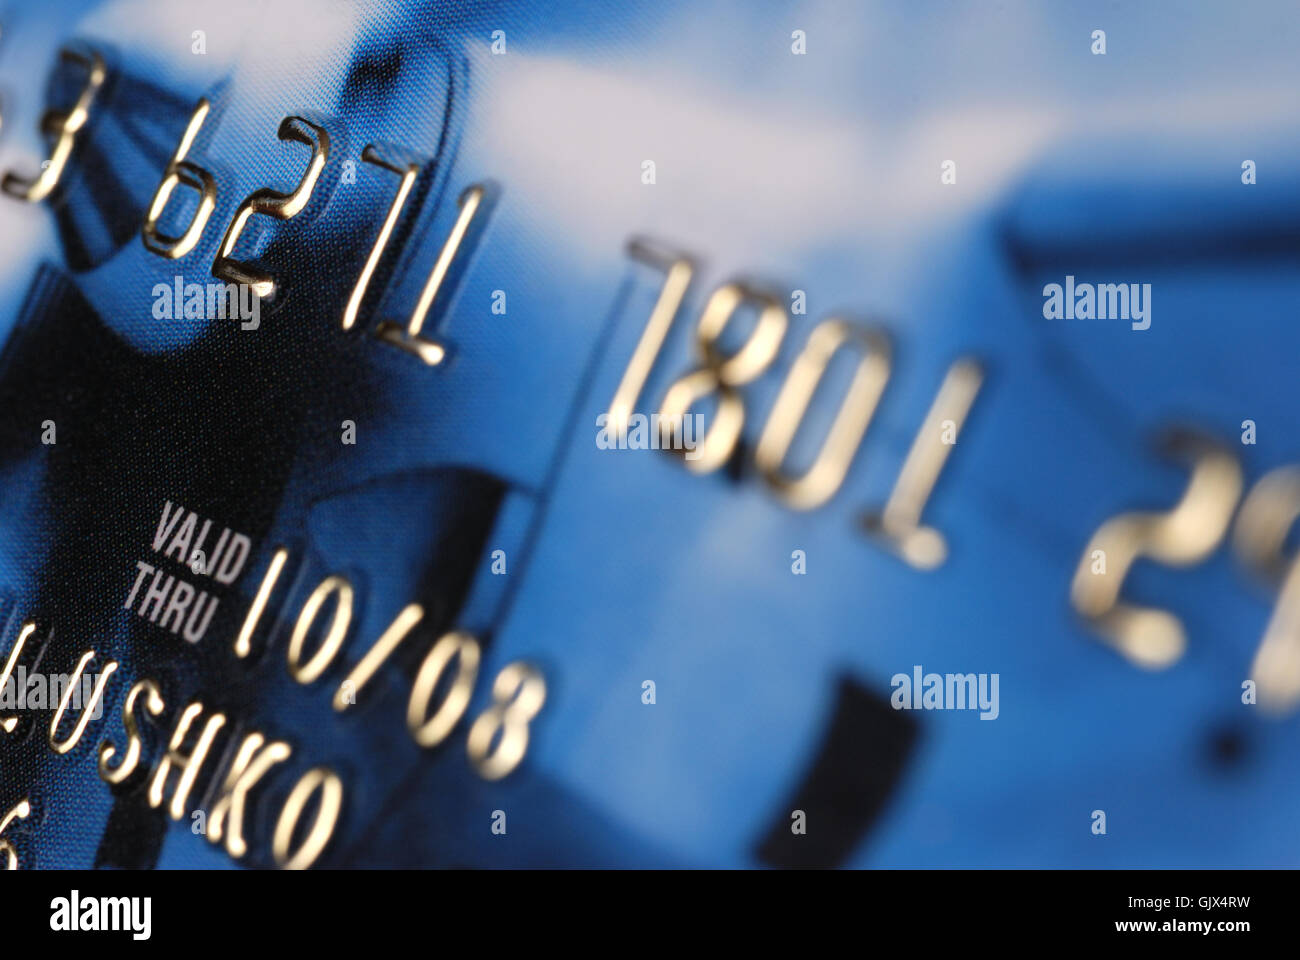 Credit card background Stock Photo